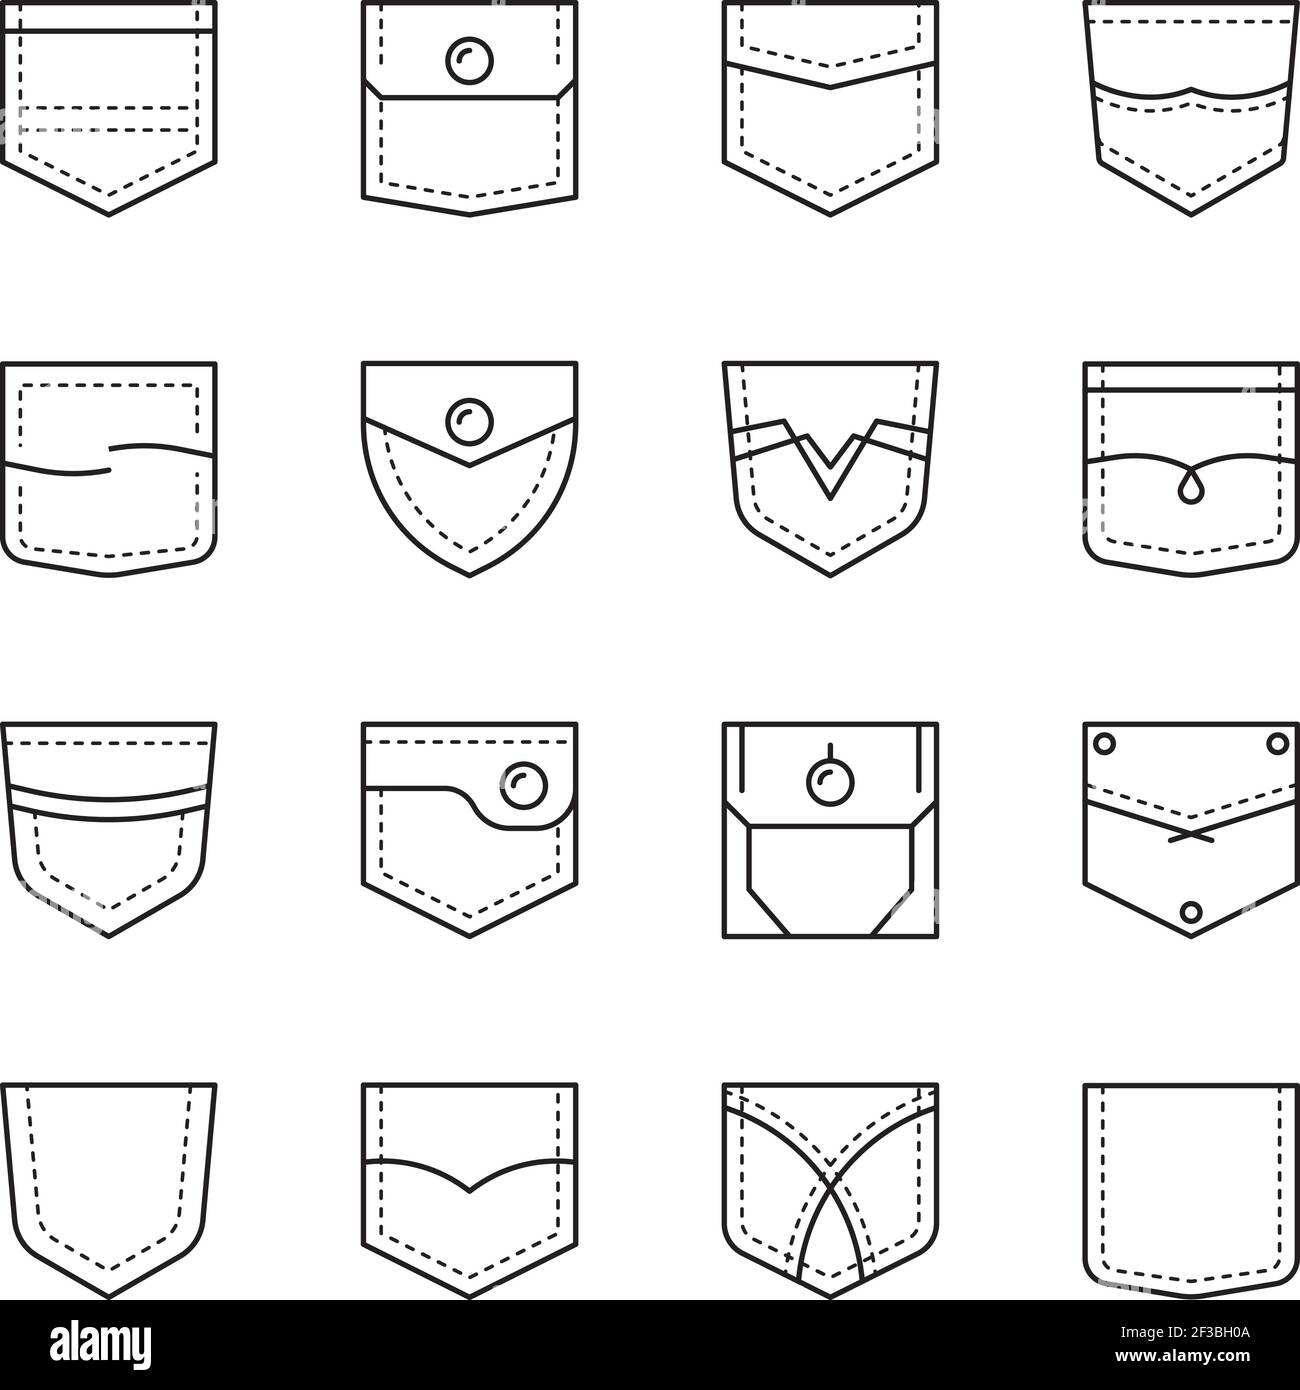 Pocket shapes. Textile sew clothe pockets bag casual style vector template Stock Vector